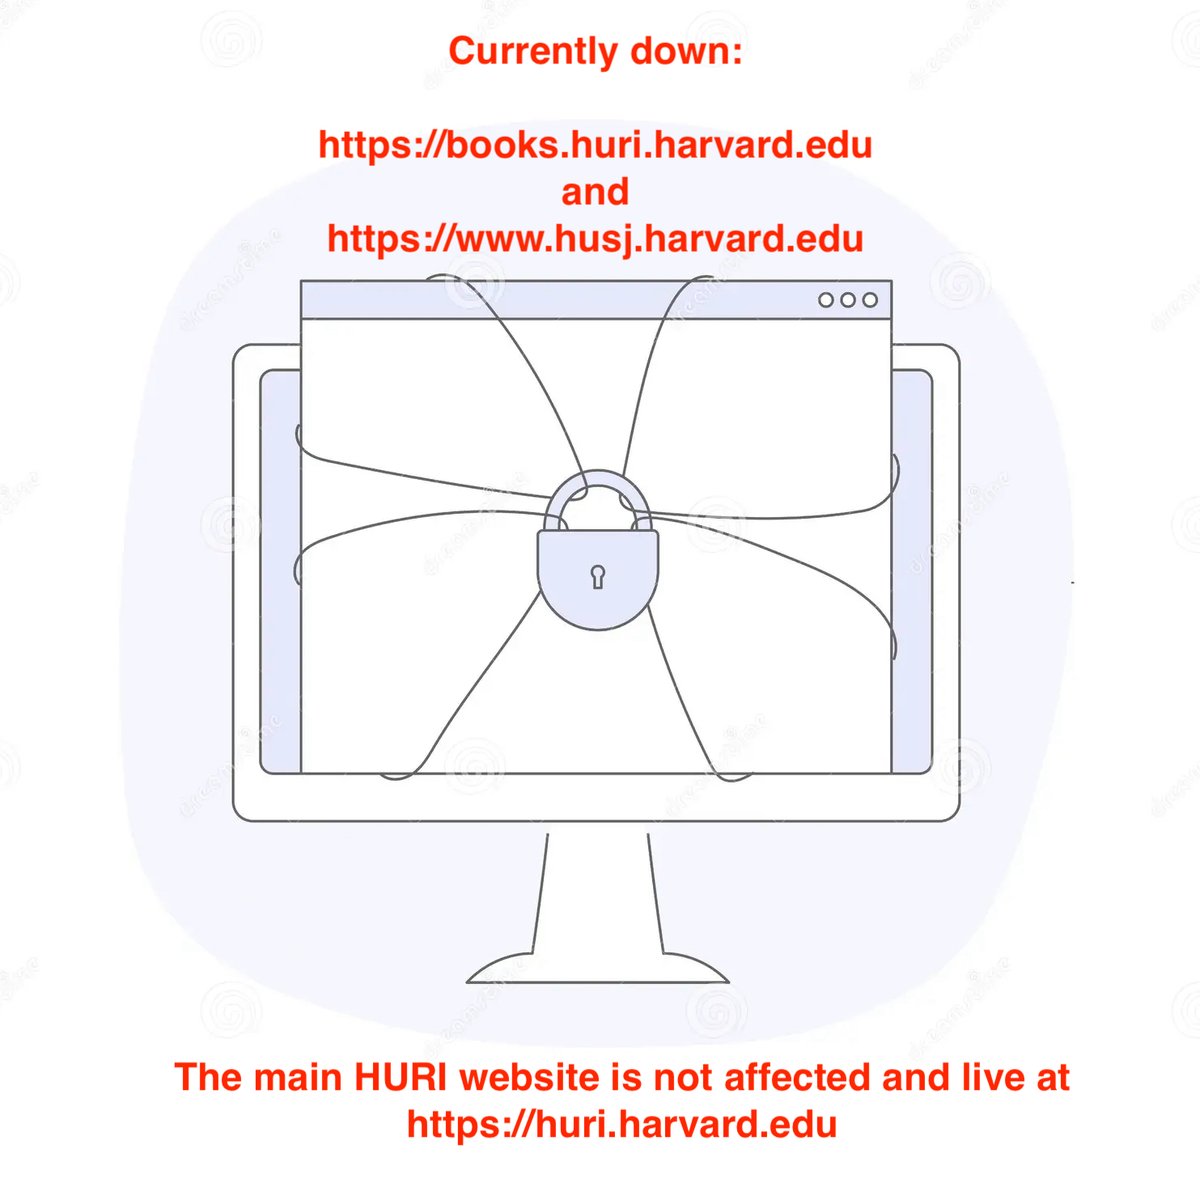 Our websites for #HURIbooks and the #HarvardUkrainianStudies journal are down due to a hacking attempt until further notice. Our understanding is that a possible breach has been contained. The main @HURI_Harvard website was not affected by this. Please bear with us as we work